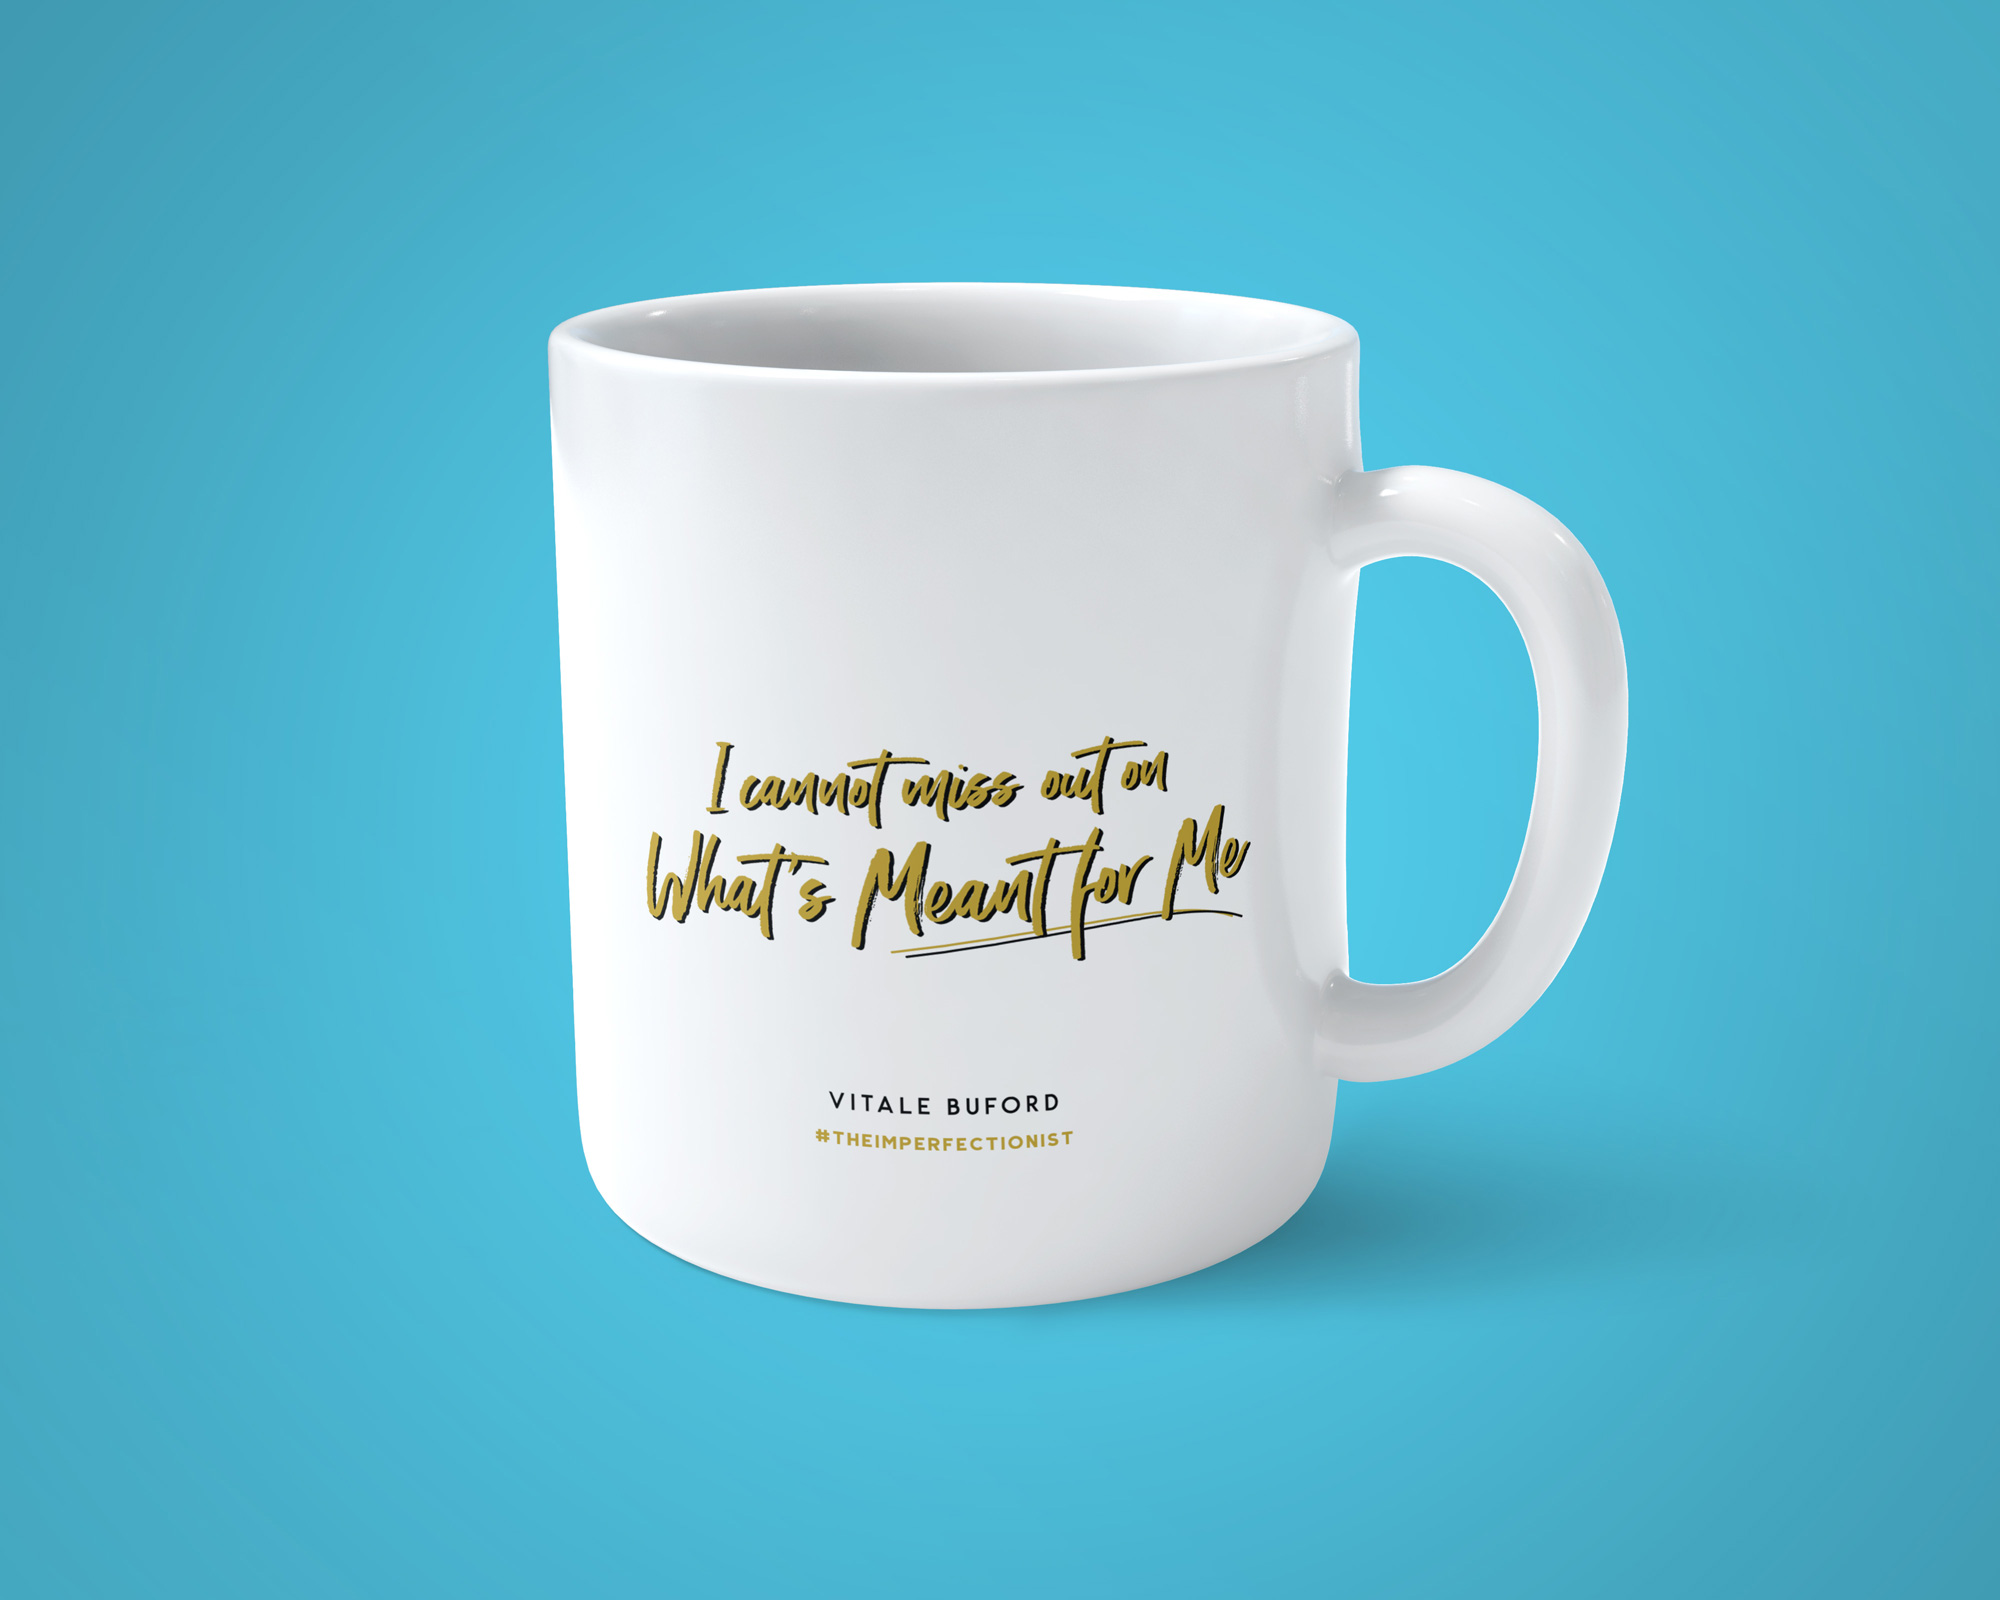 I cannot miss out on what's meant for me option 2 | branded mug designs | J. Alexandria Creative, Huntsville, Alabama graphic design studio